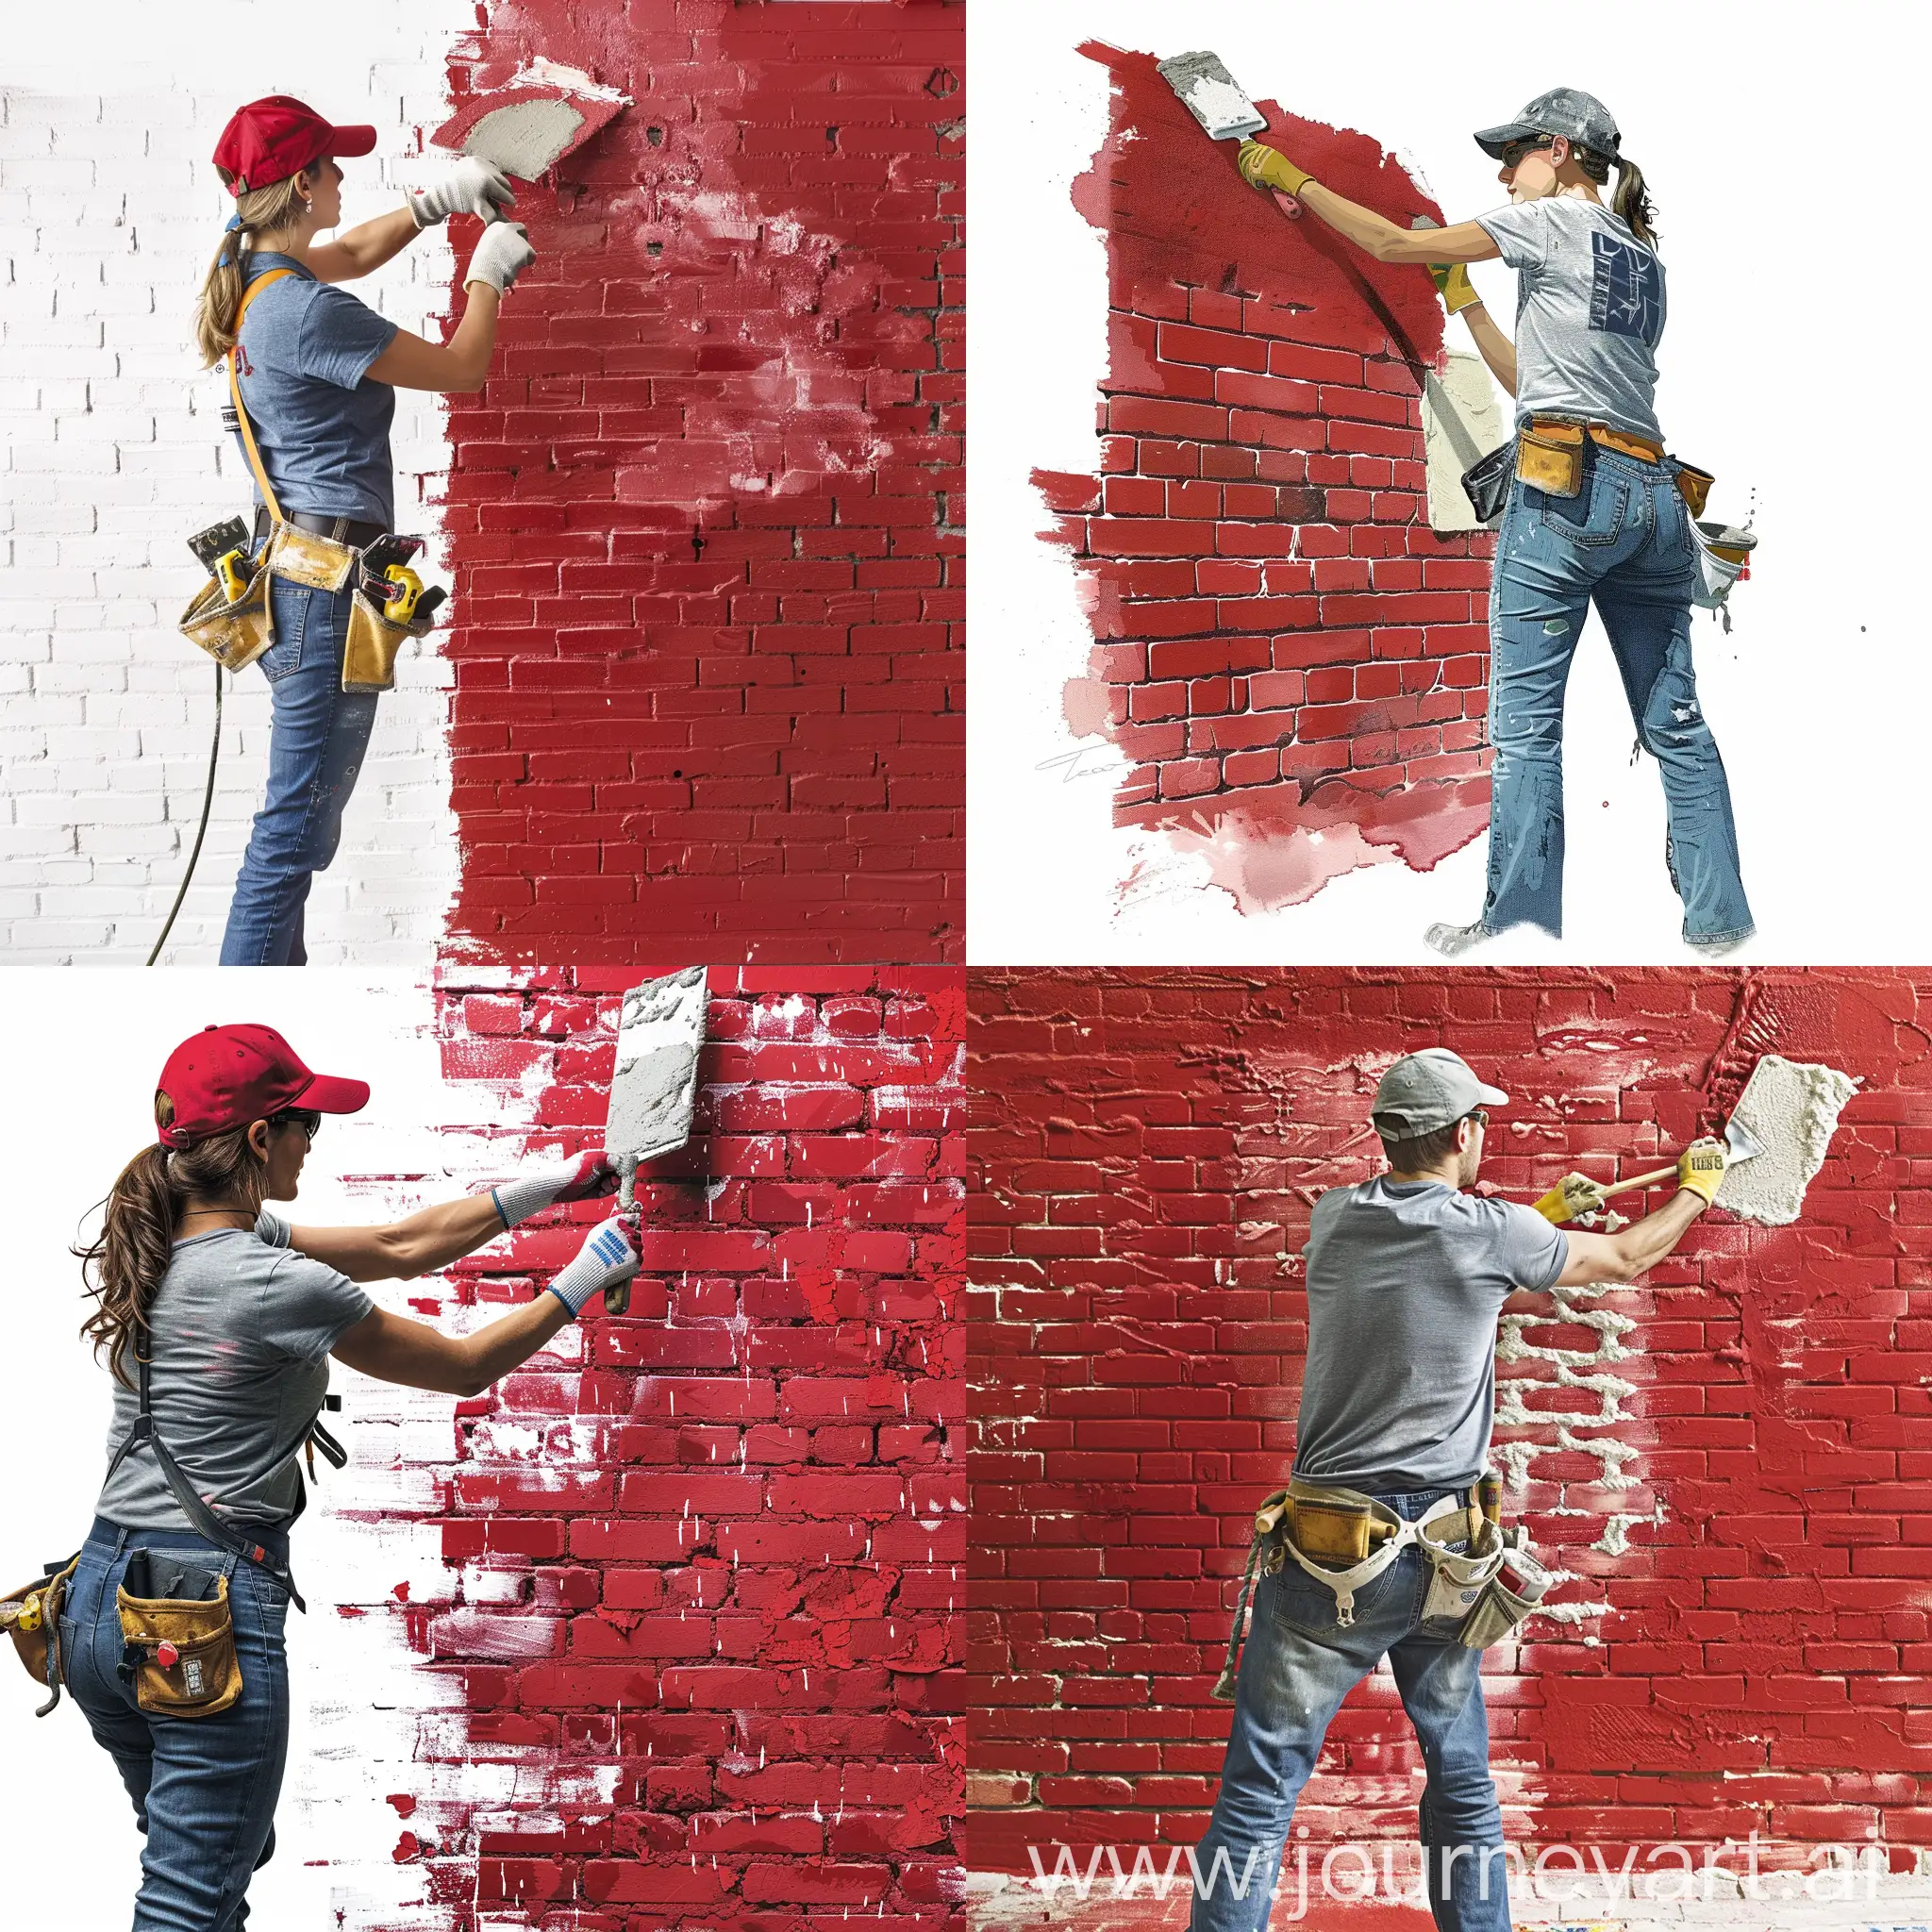 person applying plaster to a red brick wall, white background, high realism, dressed in work attire including jeans and a t-shirt, using a trowel, wearing safety gloves and a hat